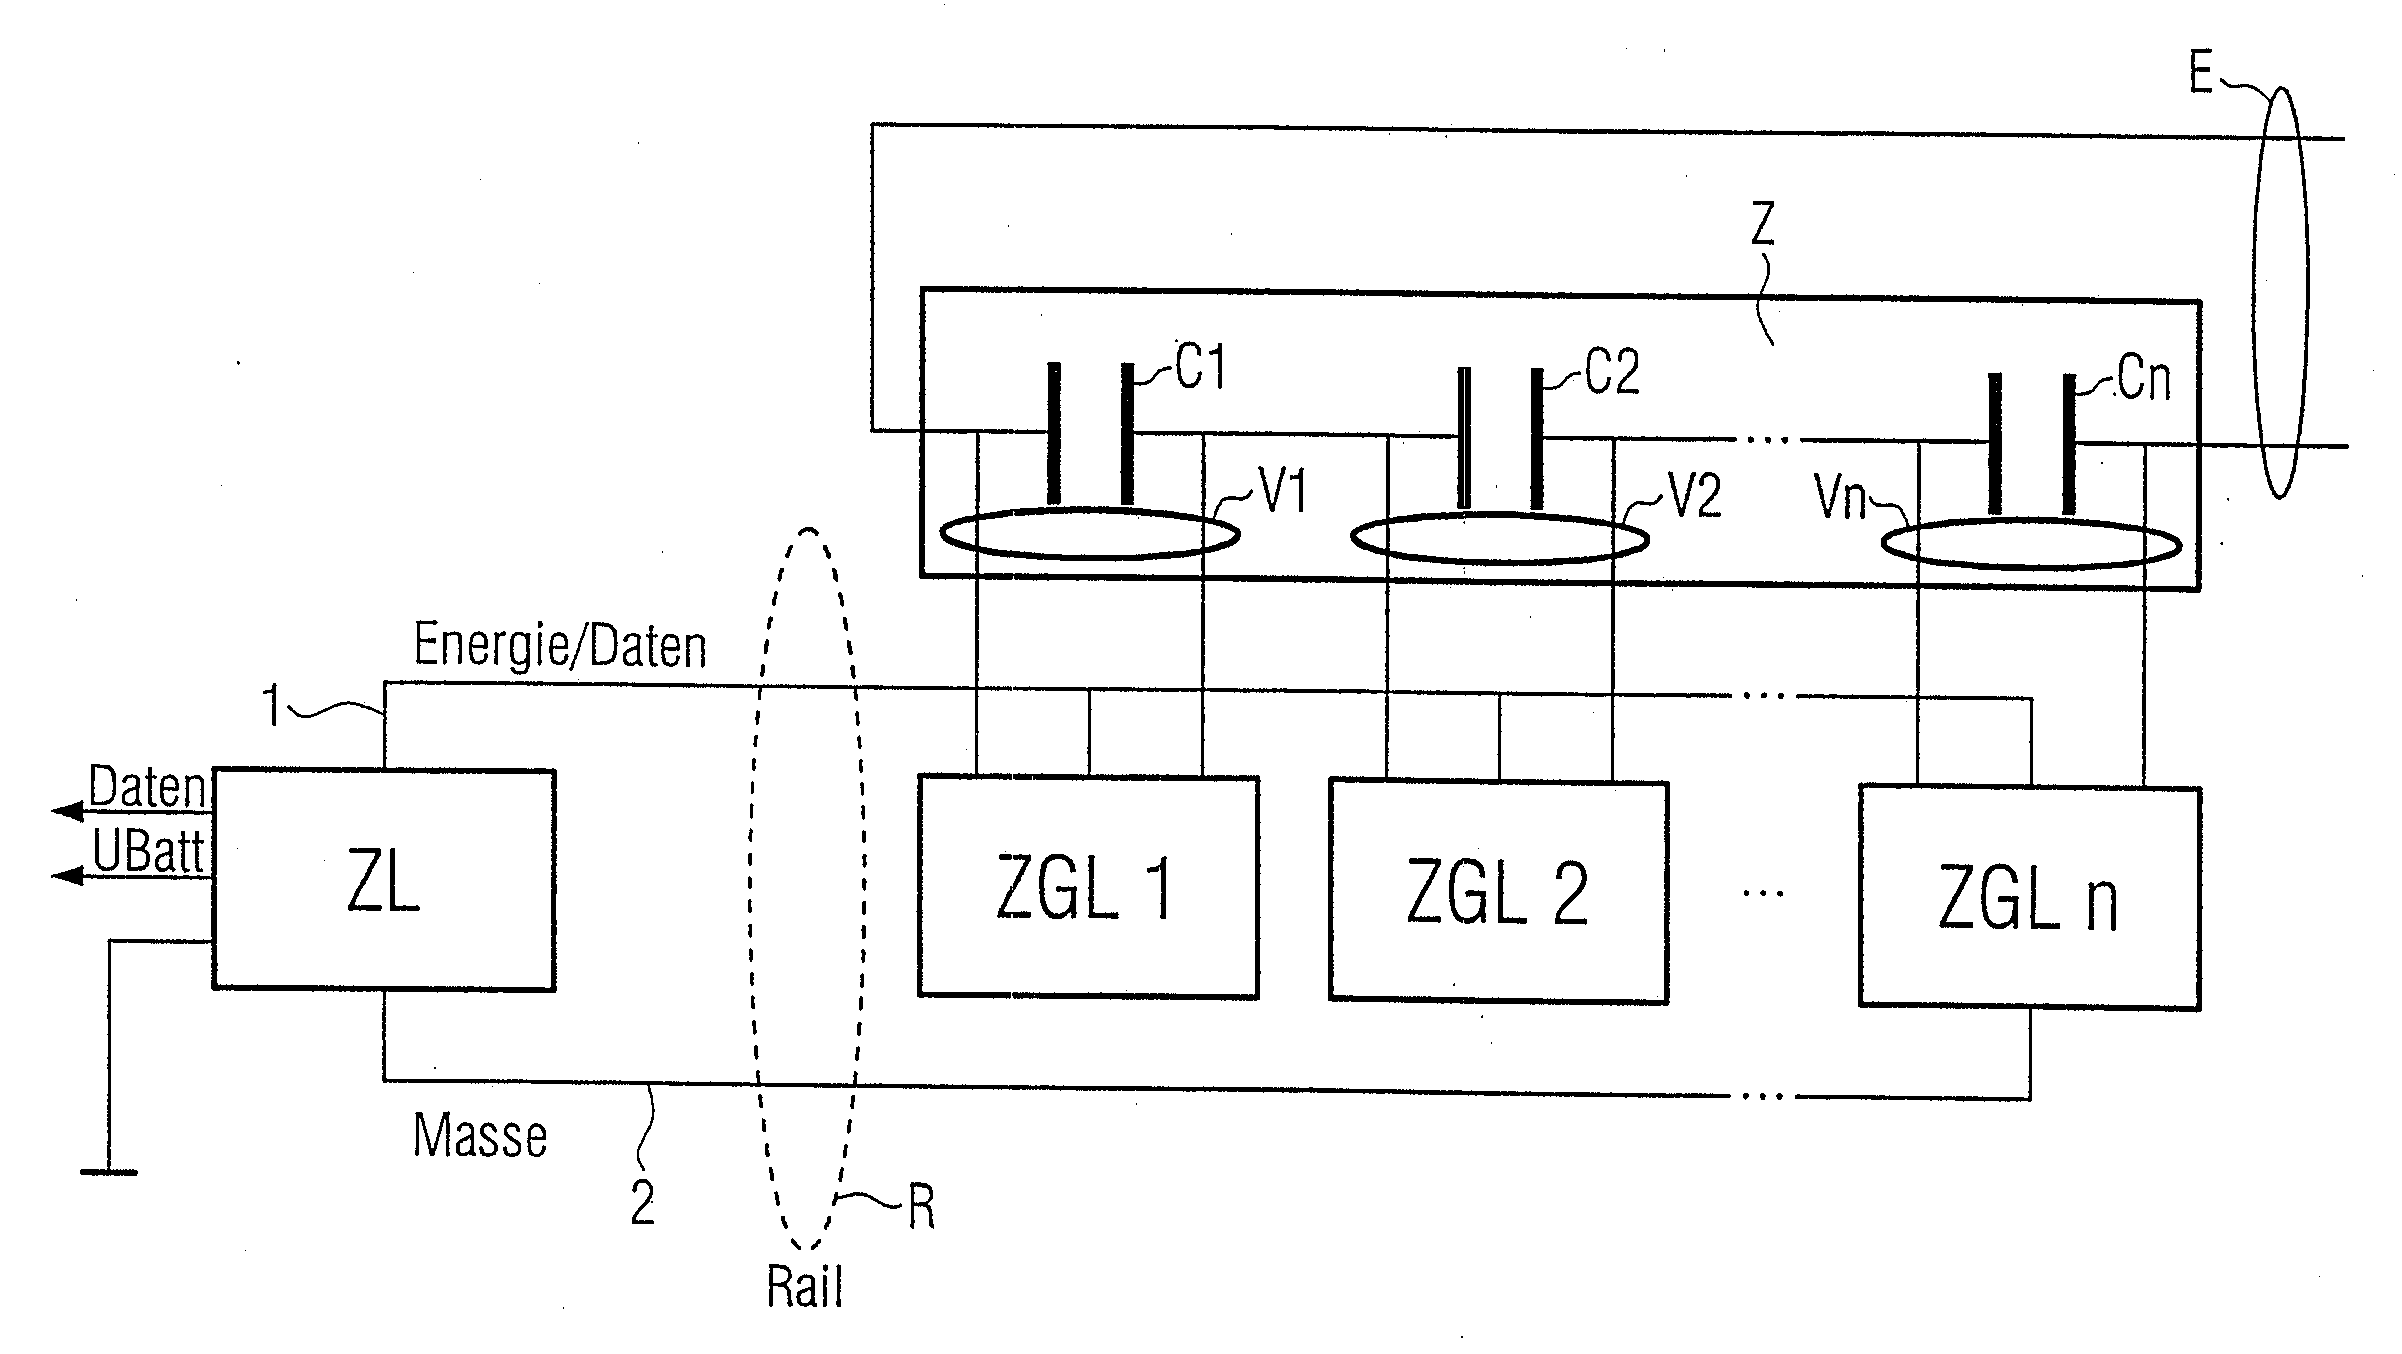 Method of Monitoring and/or Controlling or Automatically Controlling the Voltage of at Least One Group of Cells in a Compound of Cells of an Energy Storage Device